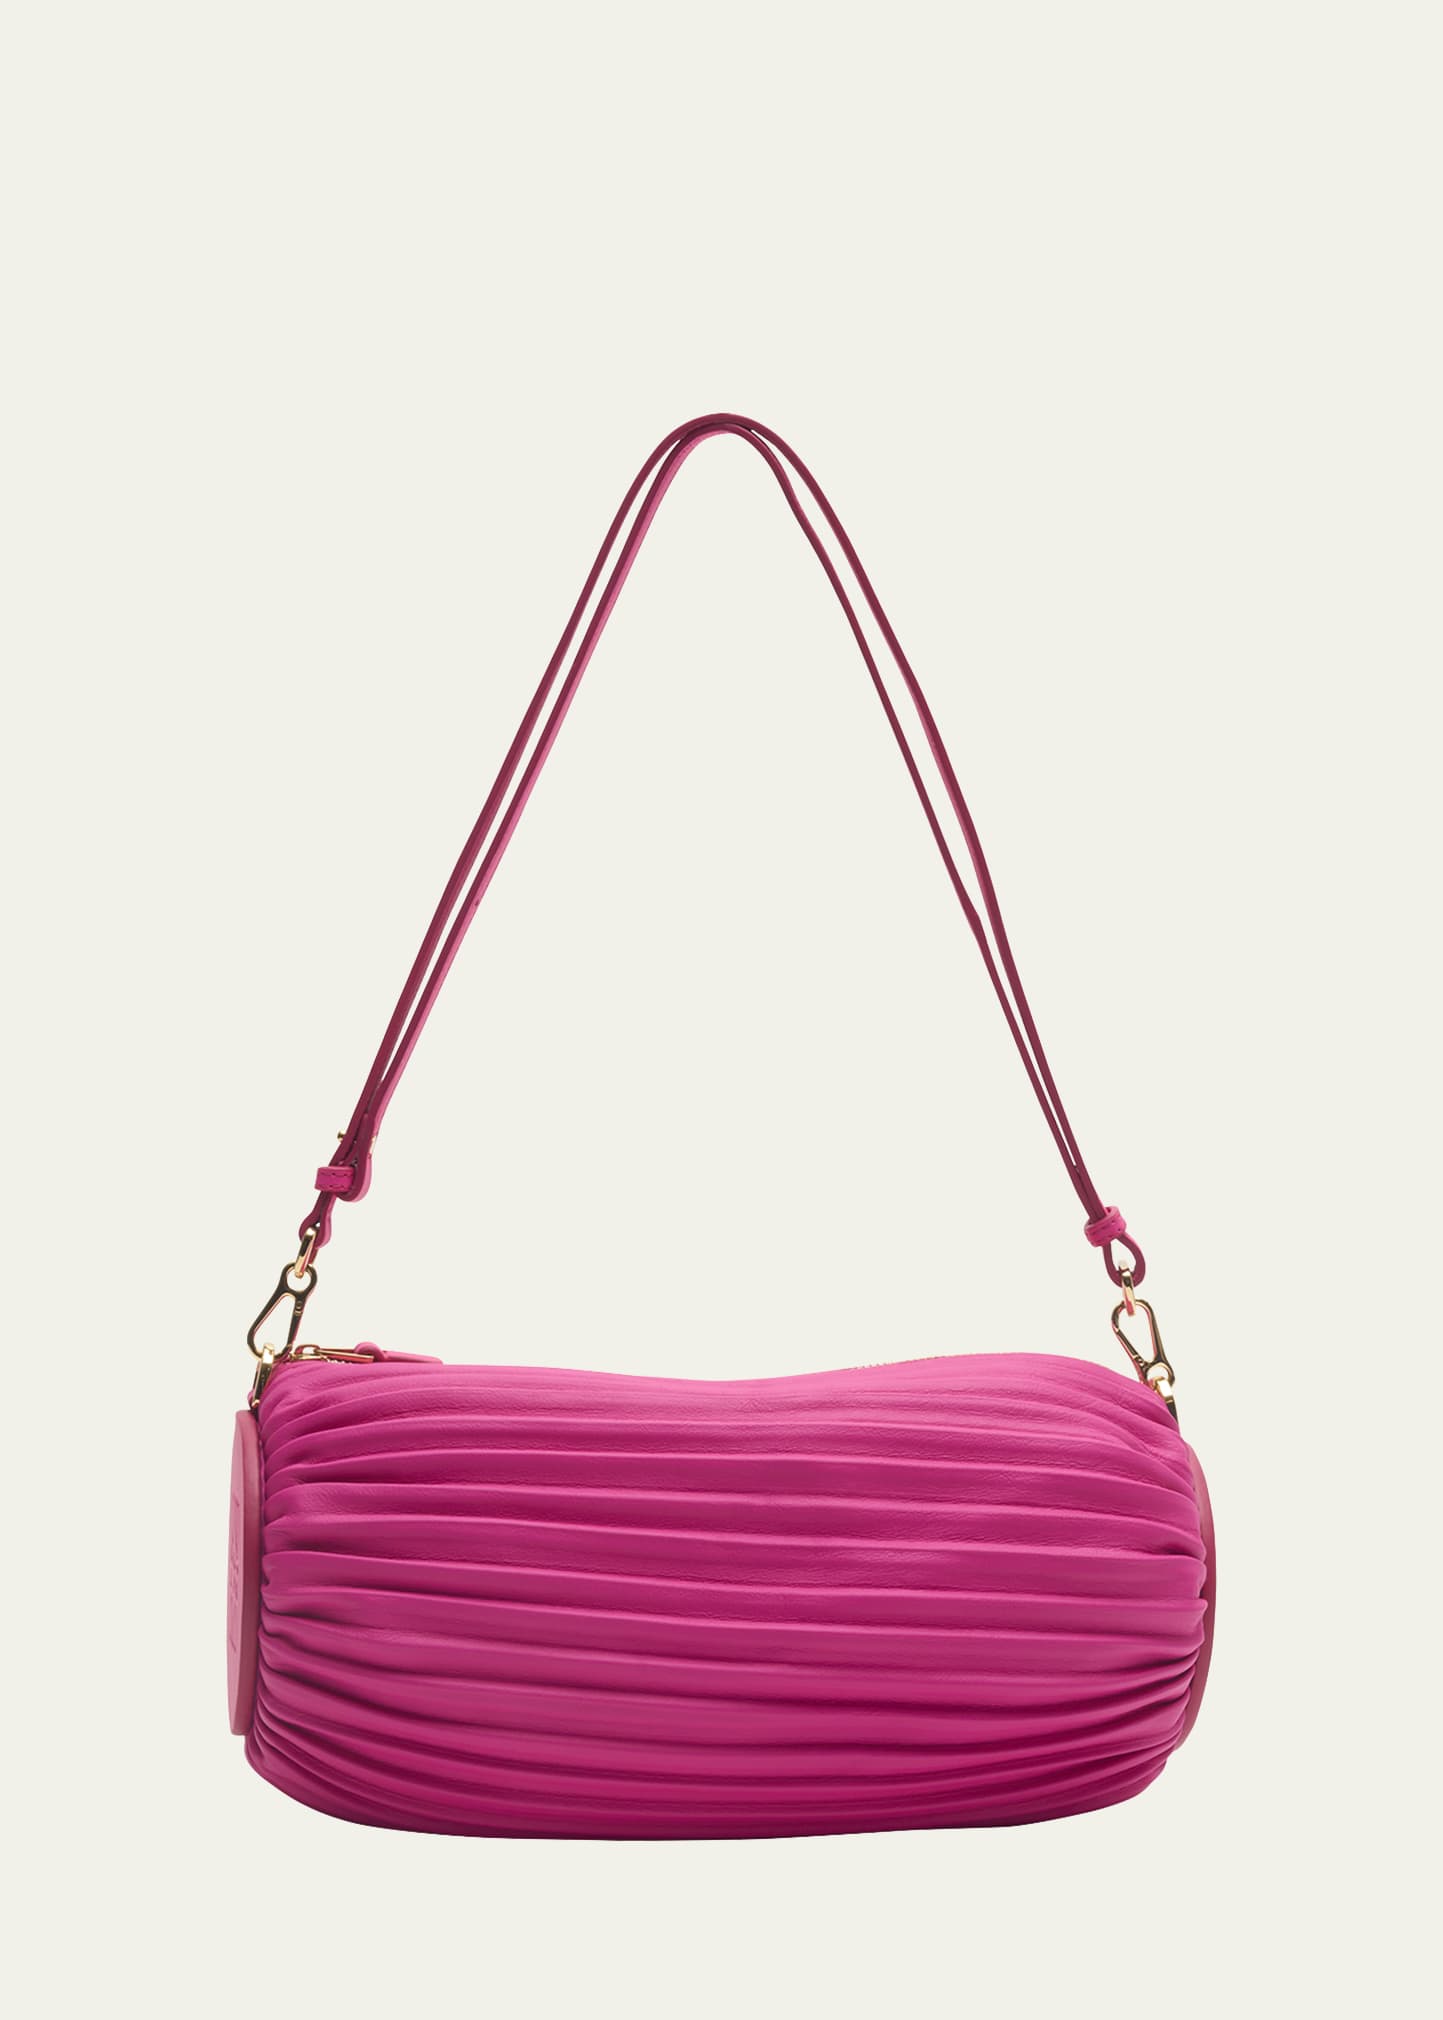 Loewe X Paula's Ibiza Bracelet Pouch In Pleated Napa Leather With Leather Strap In Fuchsia